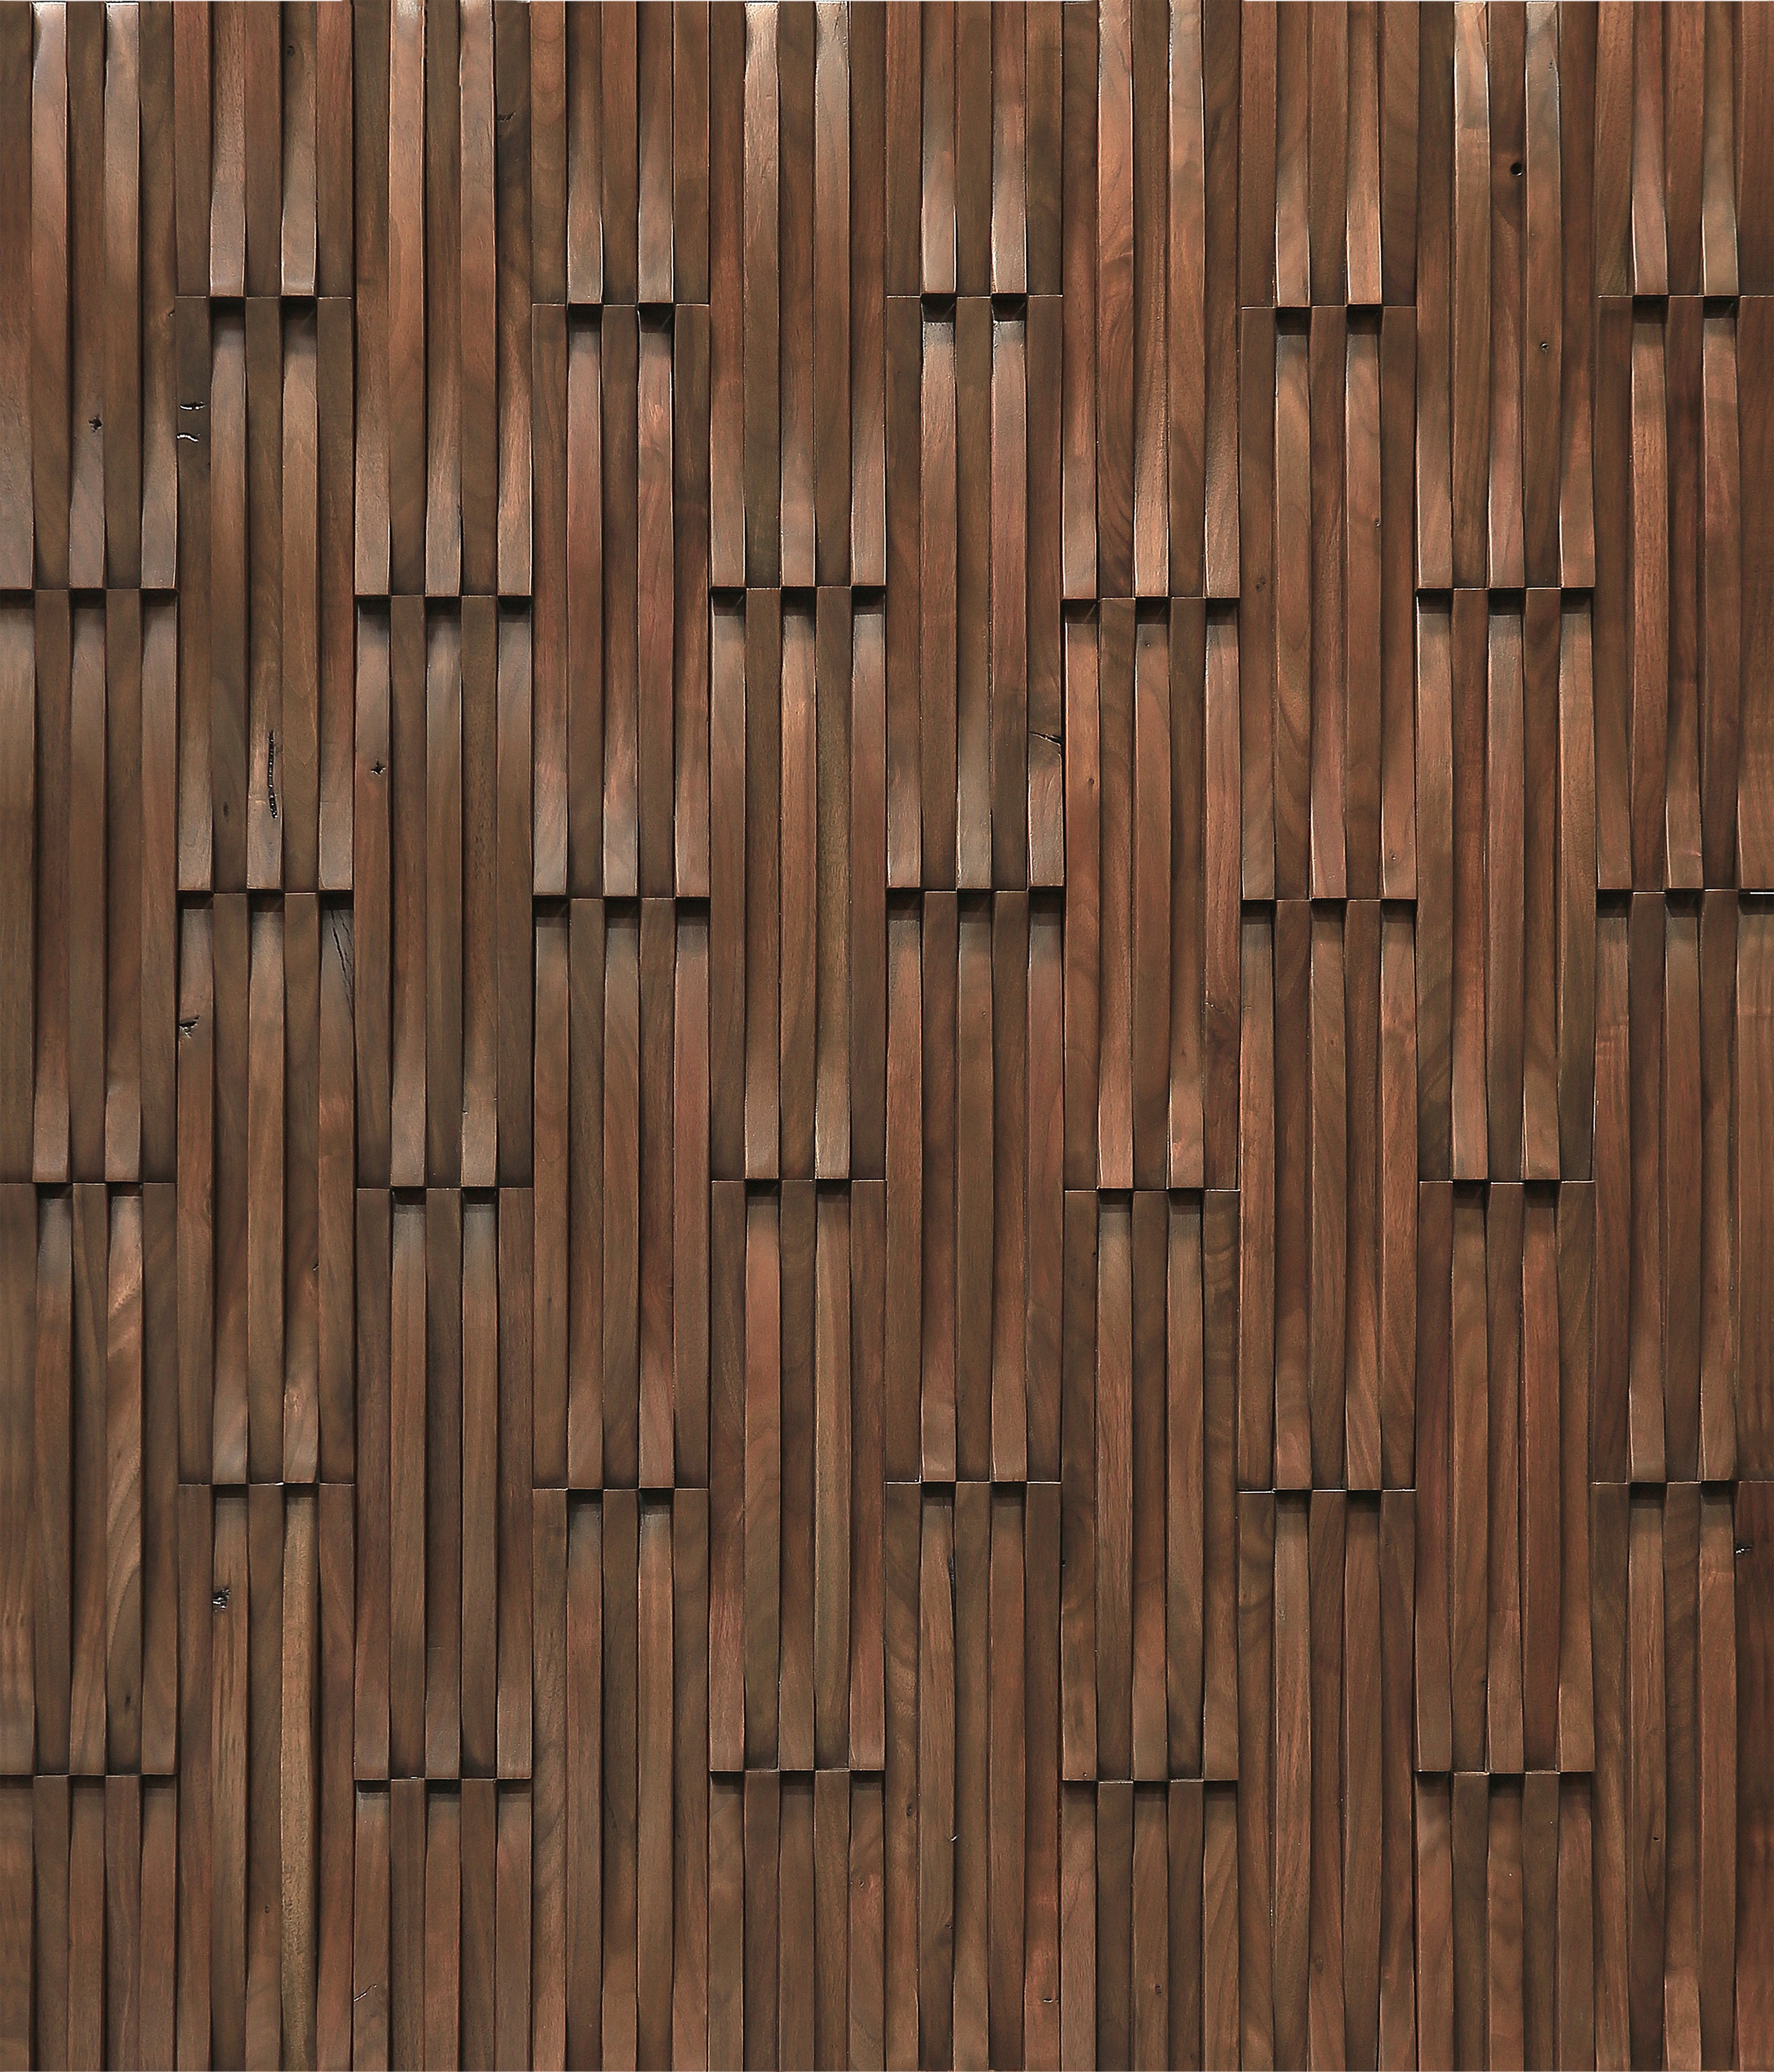 duchateau inceptiv curva stout walnut three dimensional wall natural wood panel conversion varnish for interior use distributed by surface group international